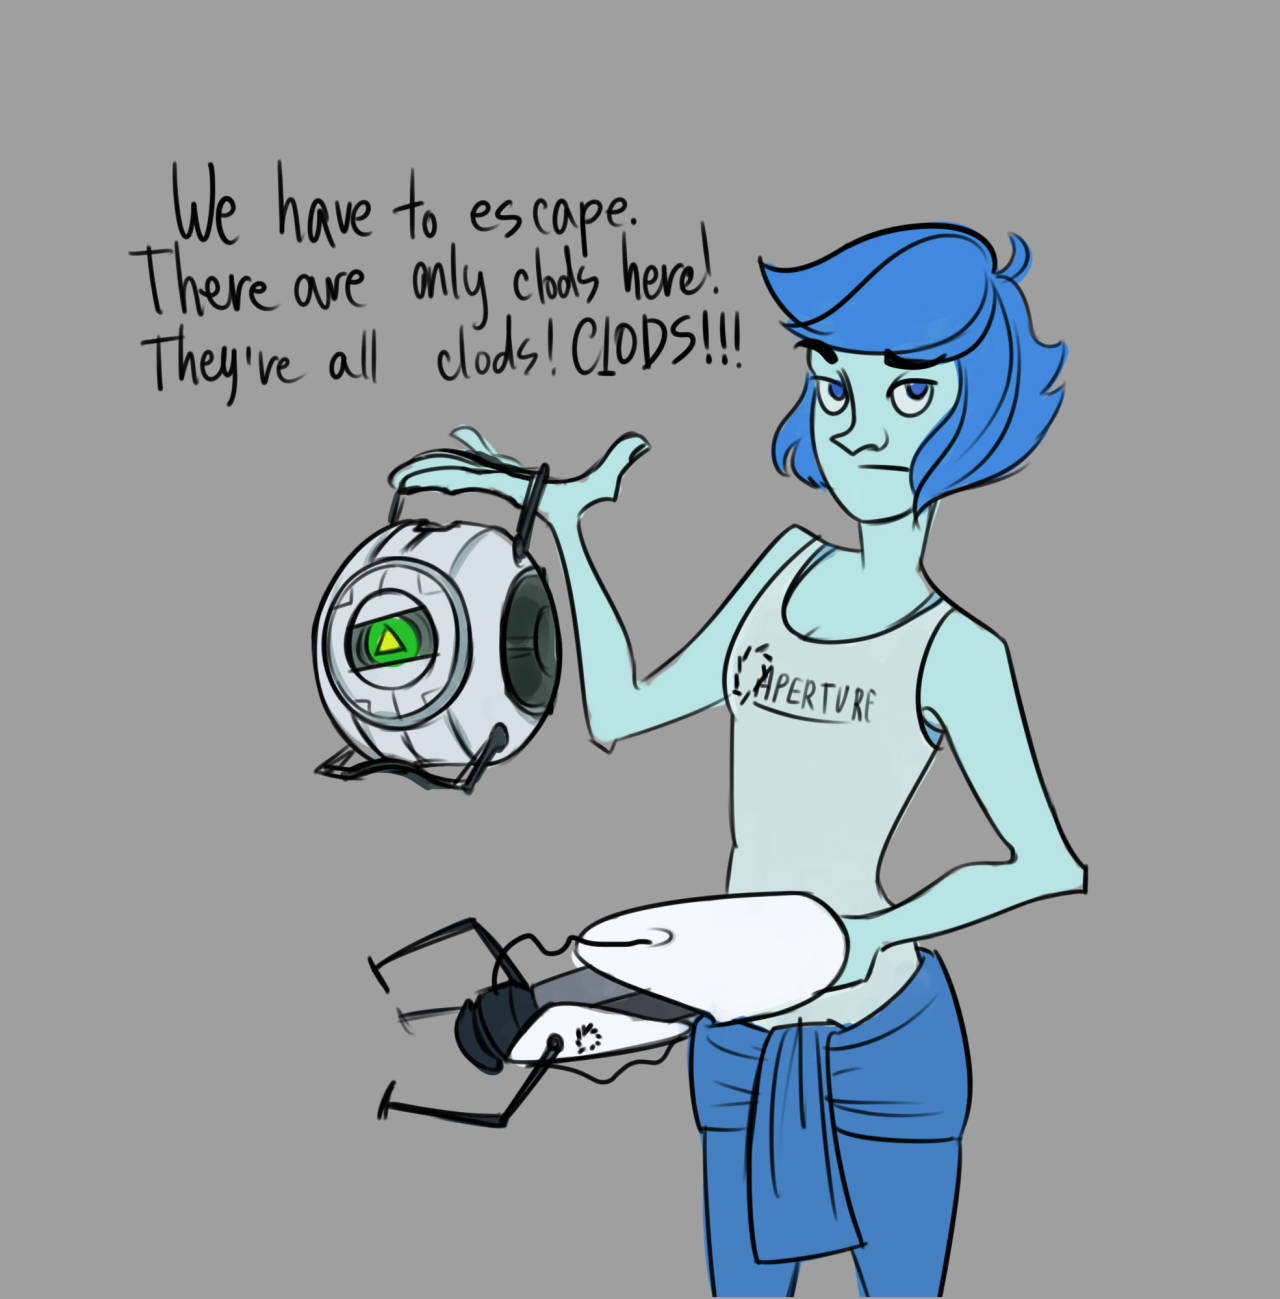 twid-vegas said: {Crossover Idea: Portal AU Where Peridot is Wheatley and Lapis Lazuli is Chell [or Peridot is Chell and Lapis is Wheatley]} Answer: Lapis is good for a mute test subject and Peridot...